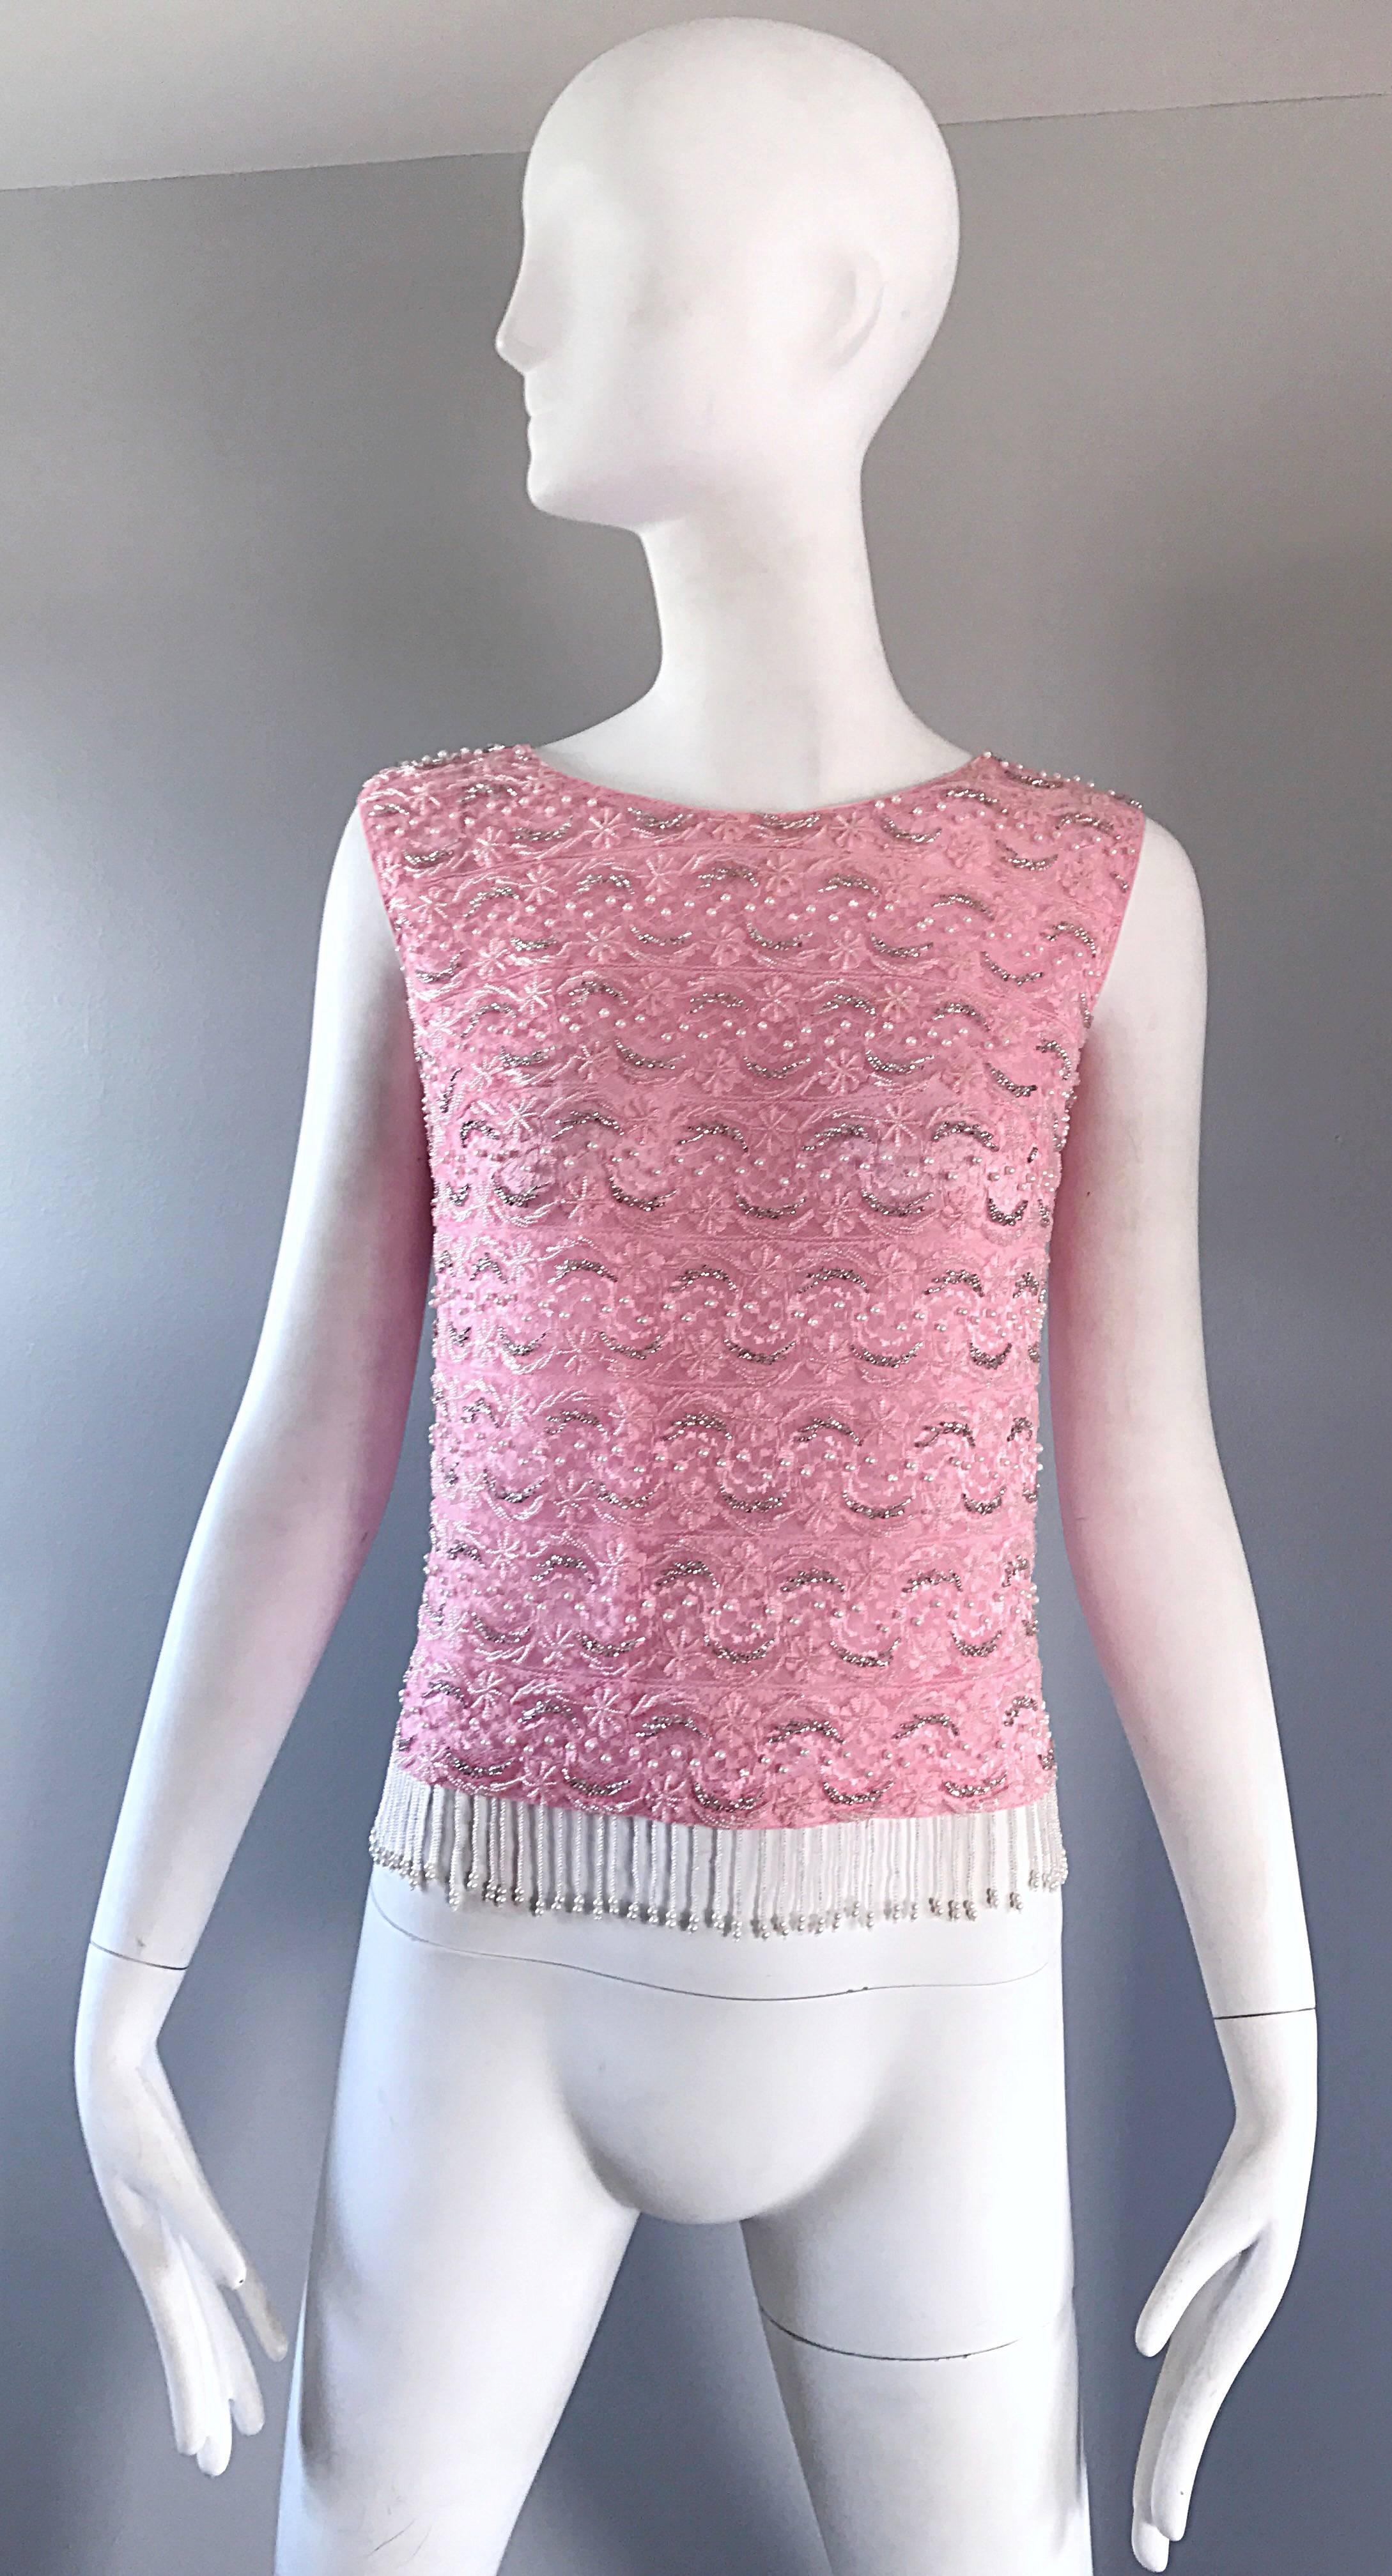 Chic 60s pink silk beaded top! So much detail to this gorgeous little gem! Lace, pearls, sequins and beads throughout. Super soft silk feels amazing against the body! Beaded fringe on the hem. Full metal zipper up the back with hook-and-eye closure.